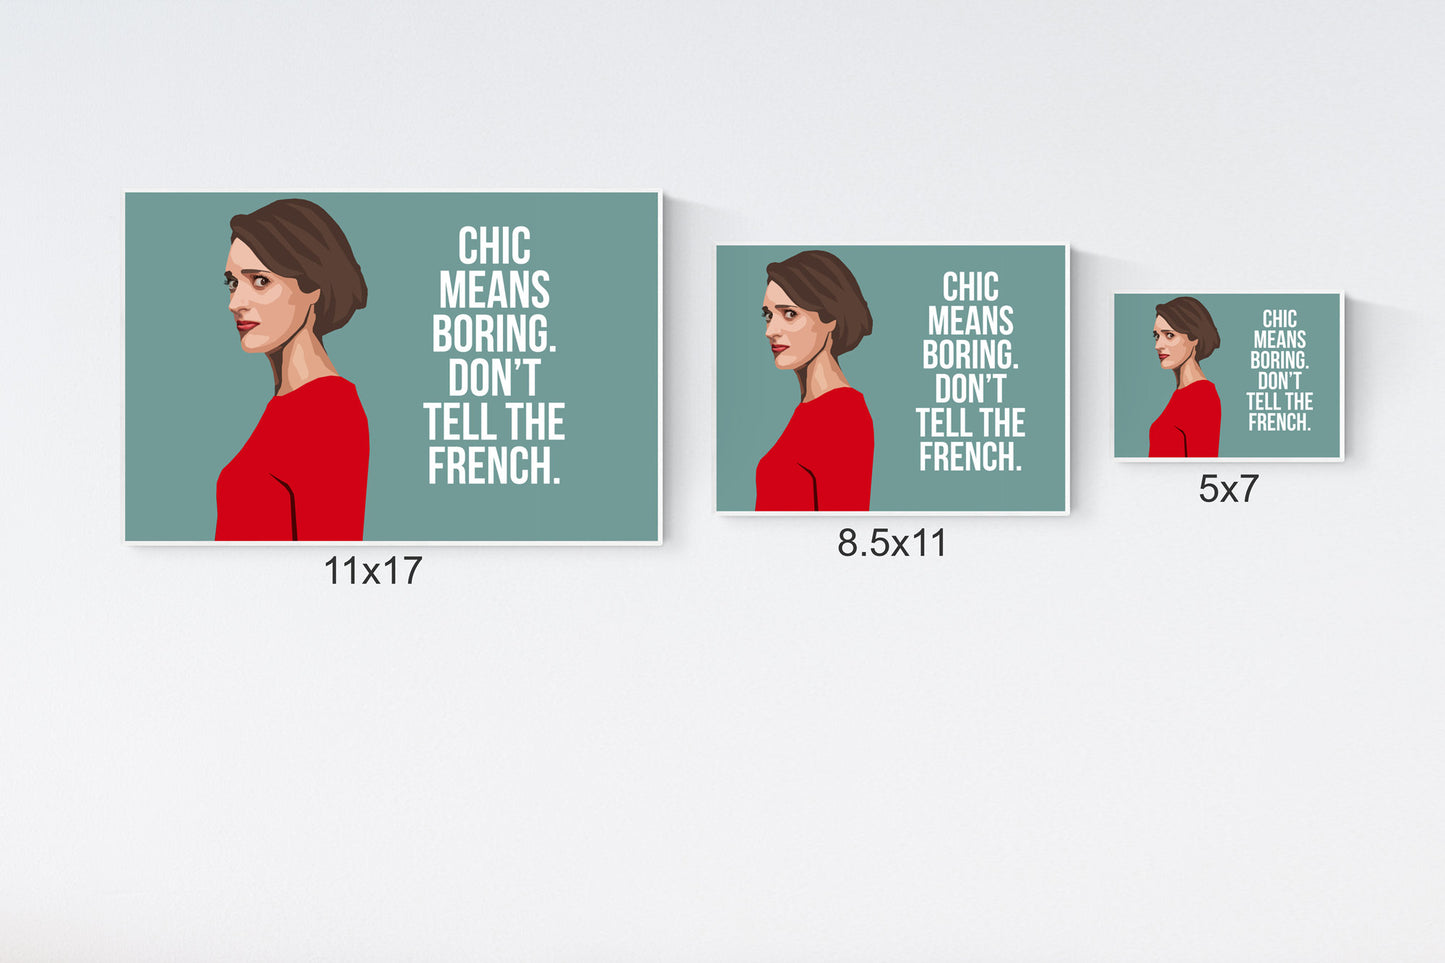 Chic means boring. Don't tell the French. - Fleabag TV Show art print